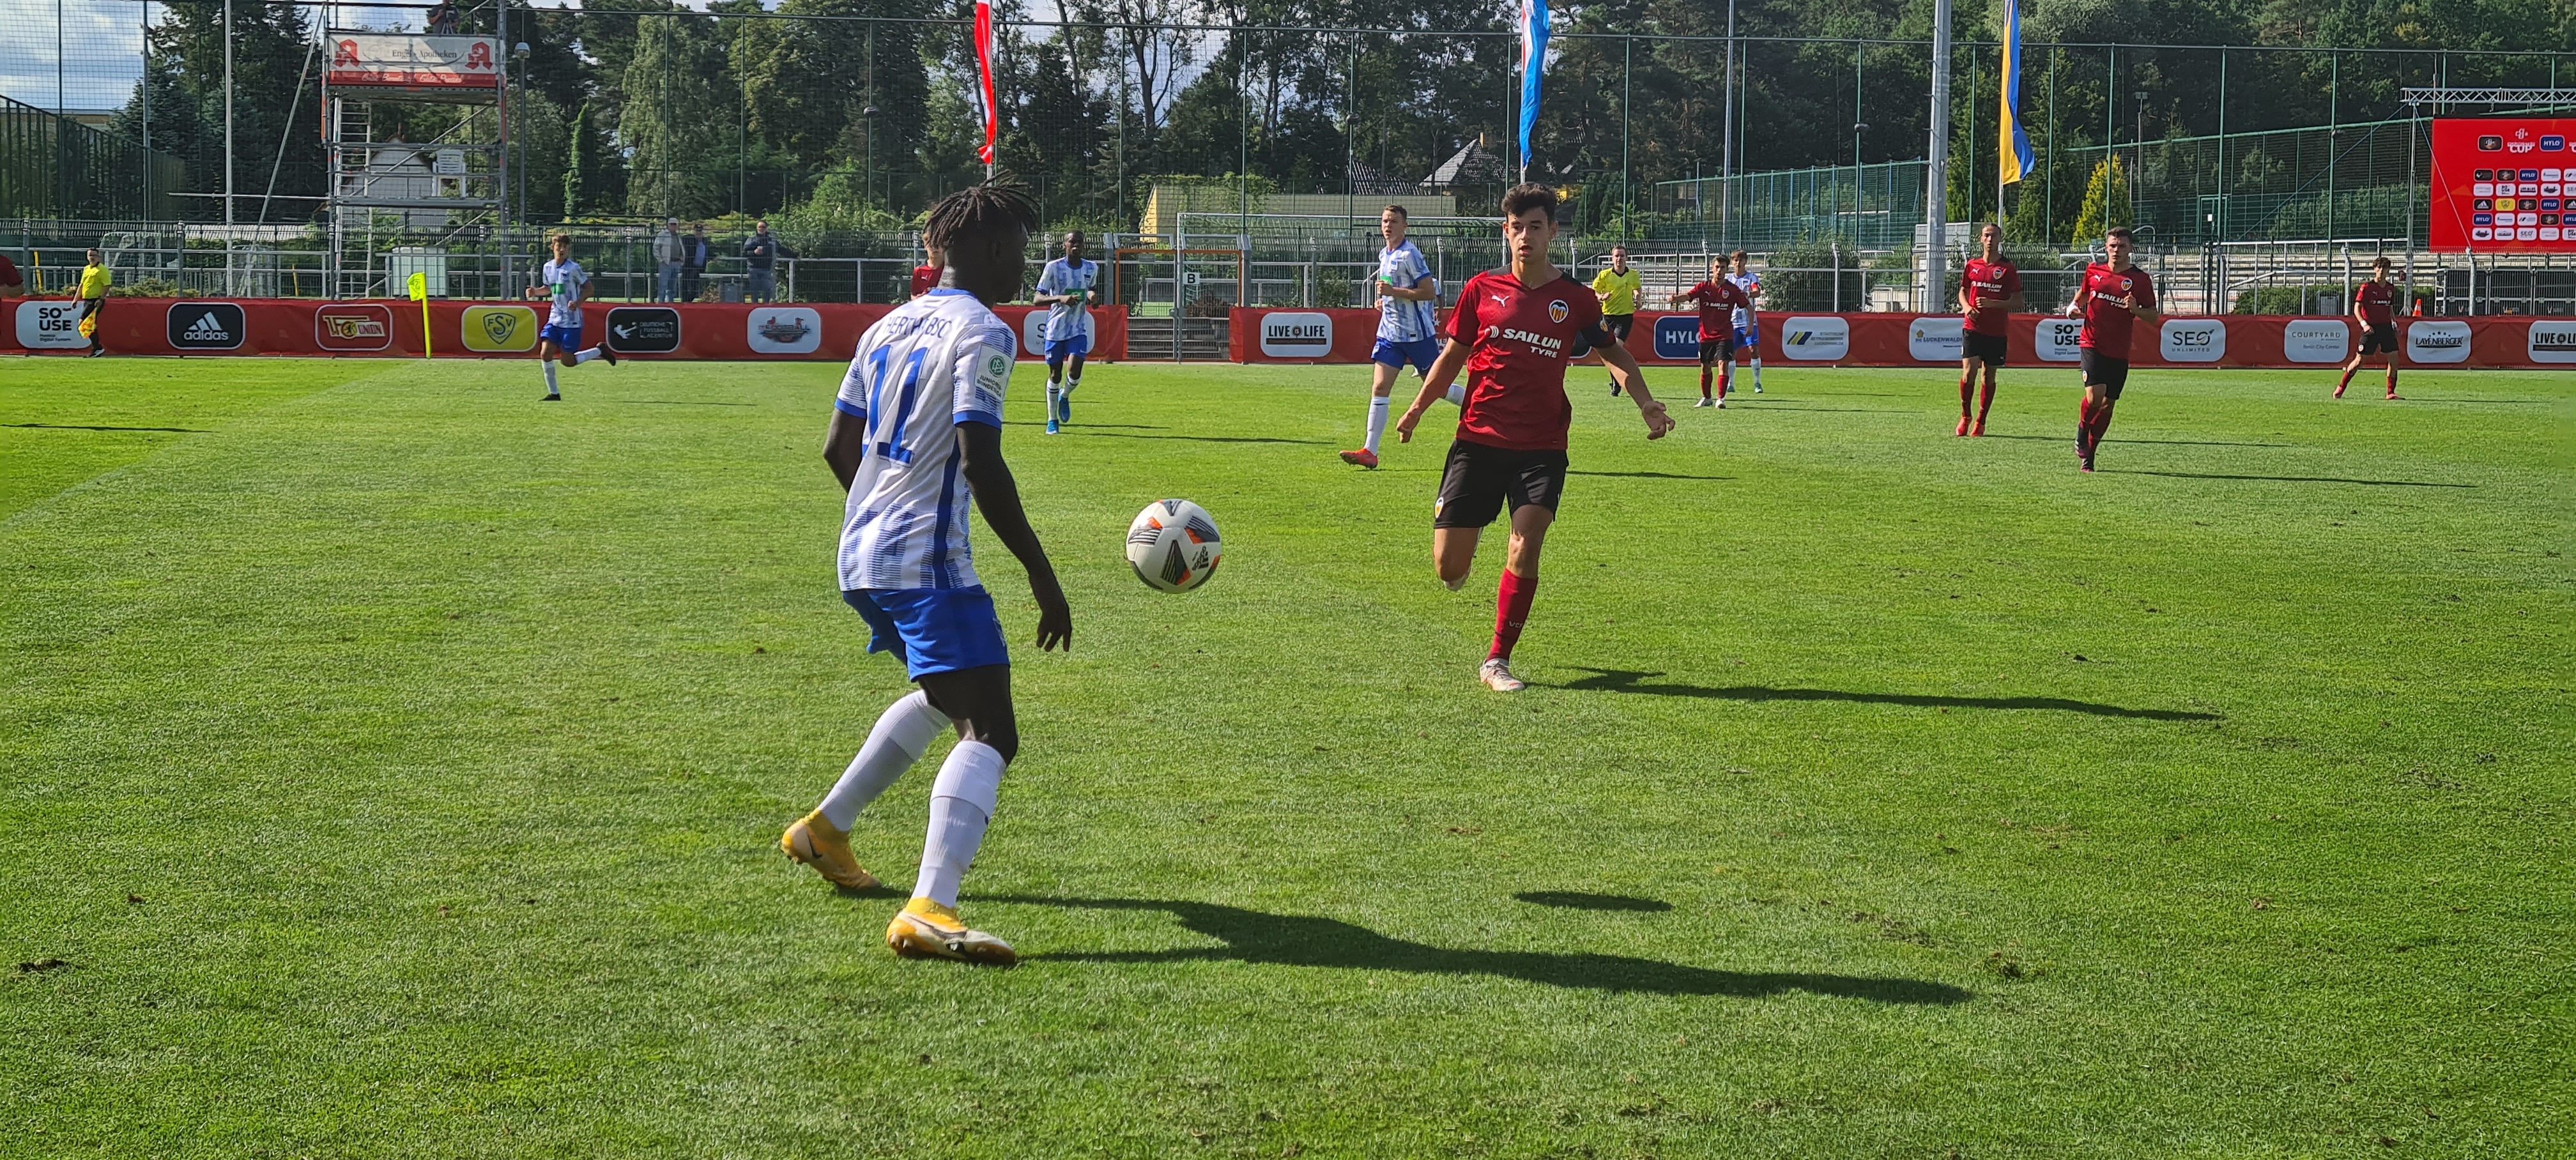 Abschlusstag beim GG8 Youngster-Cup 25